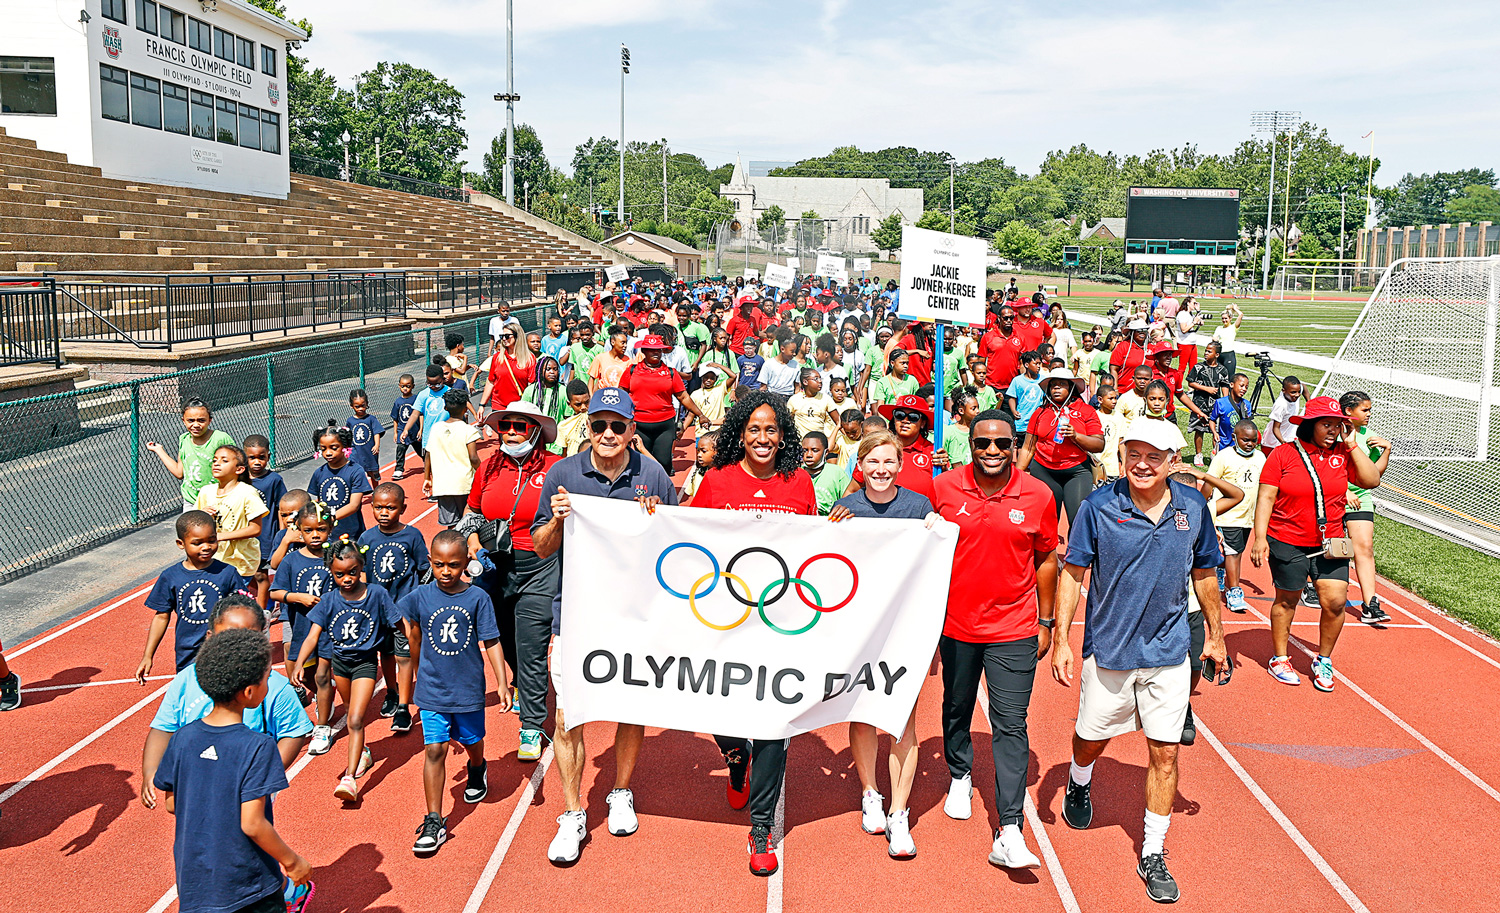 St. Louis Sports Commission to Host Olympic Day Celebration on June 23 at Francis Olympic Field